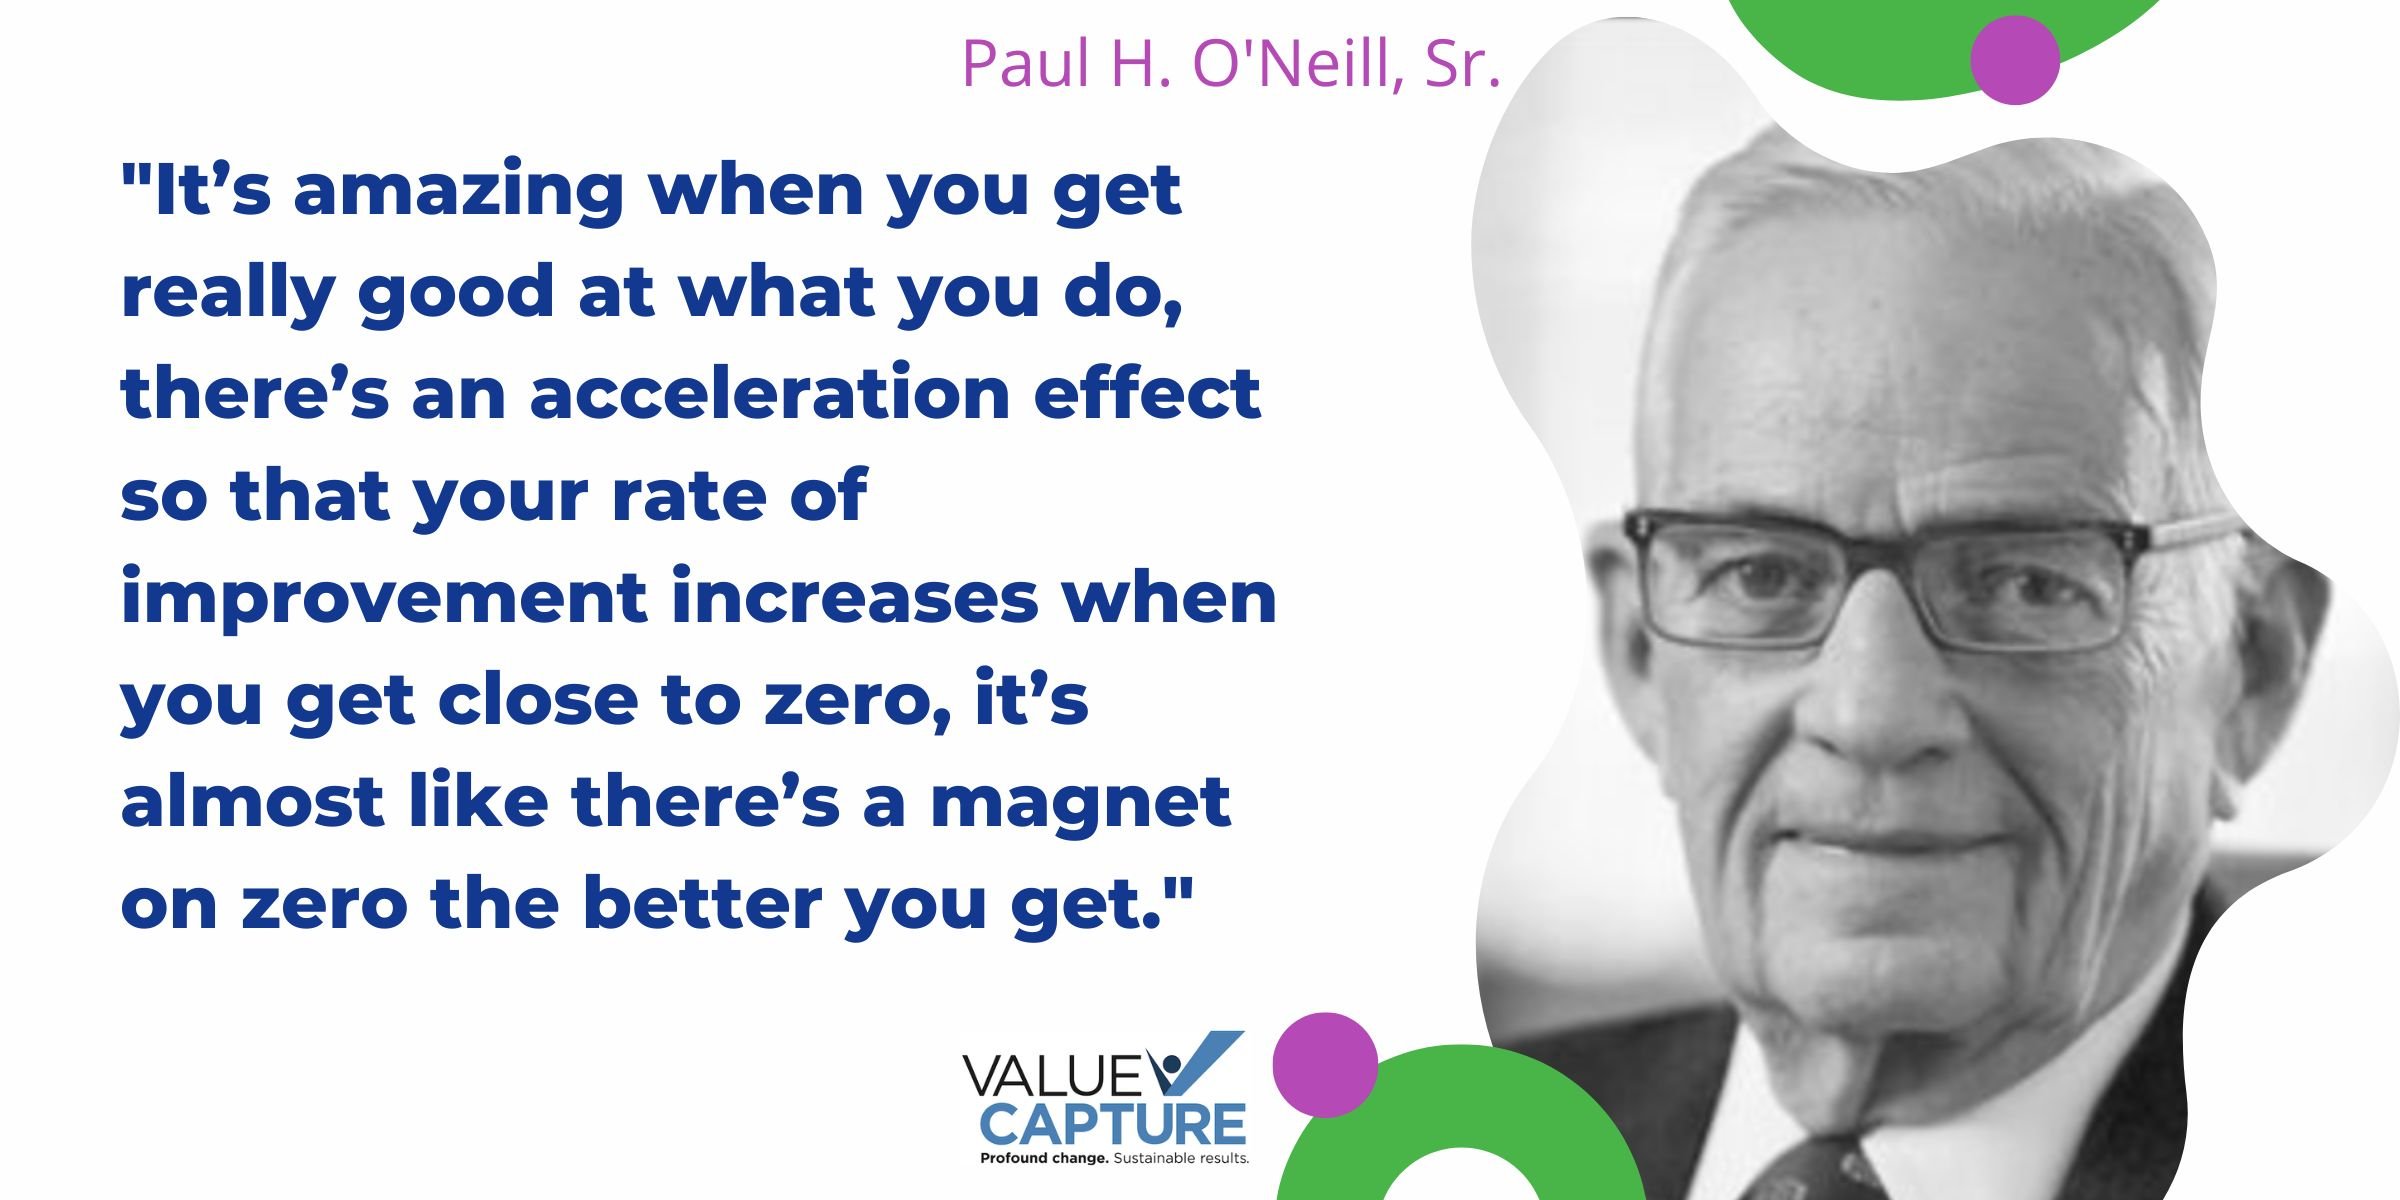 "It’s amazing when you get really good at what you do, there’s an acceleration effect so that your rate of improvement increases when you get close to zero, it’s almost like there’s a magnet on zero the better you get."  Paul O'Neill